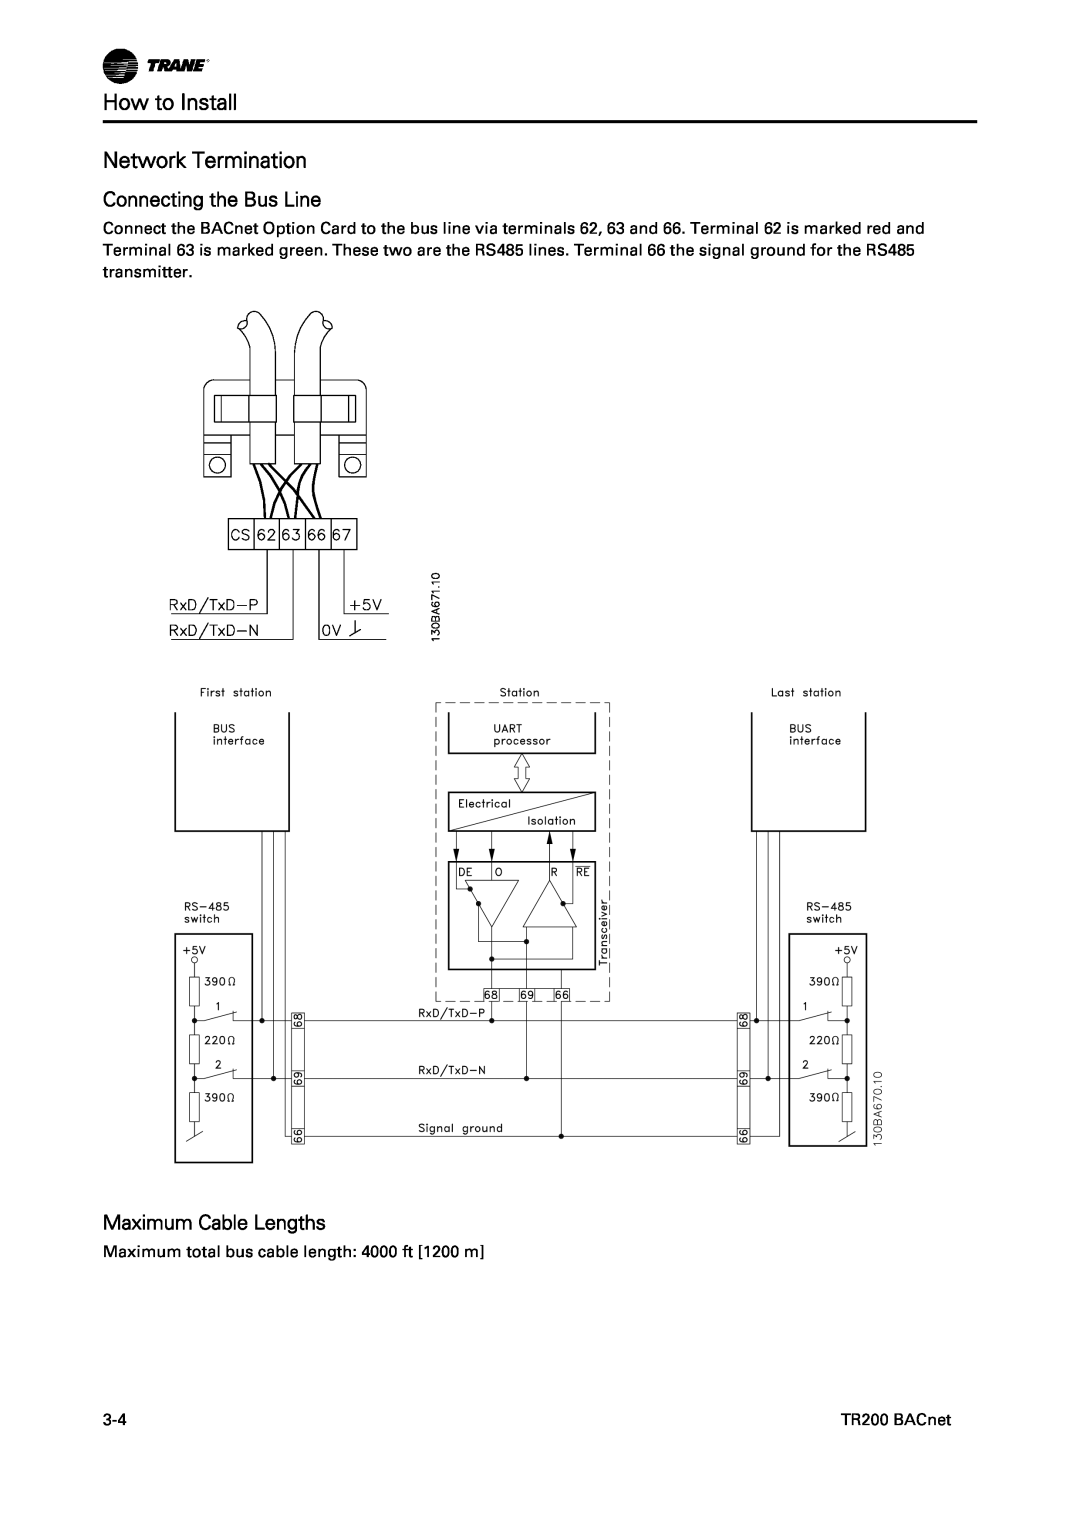 Trane BACnet Option Module, TR200 How to Install Network Termination, Connecting the Bus Line, Maximum Cable Lengths 